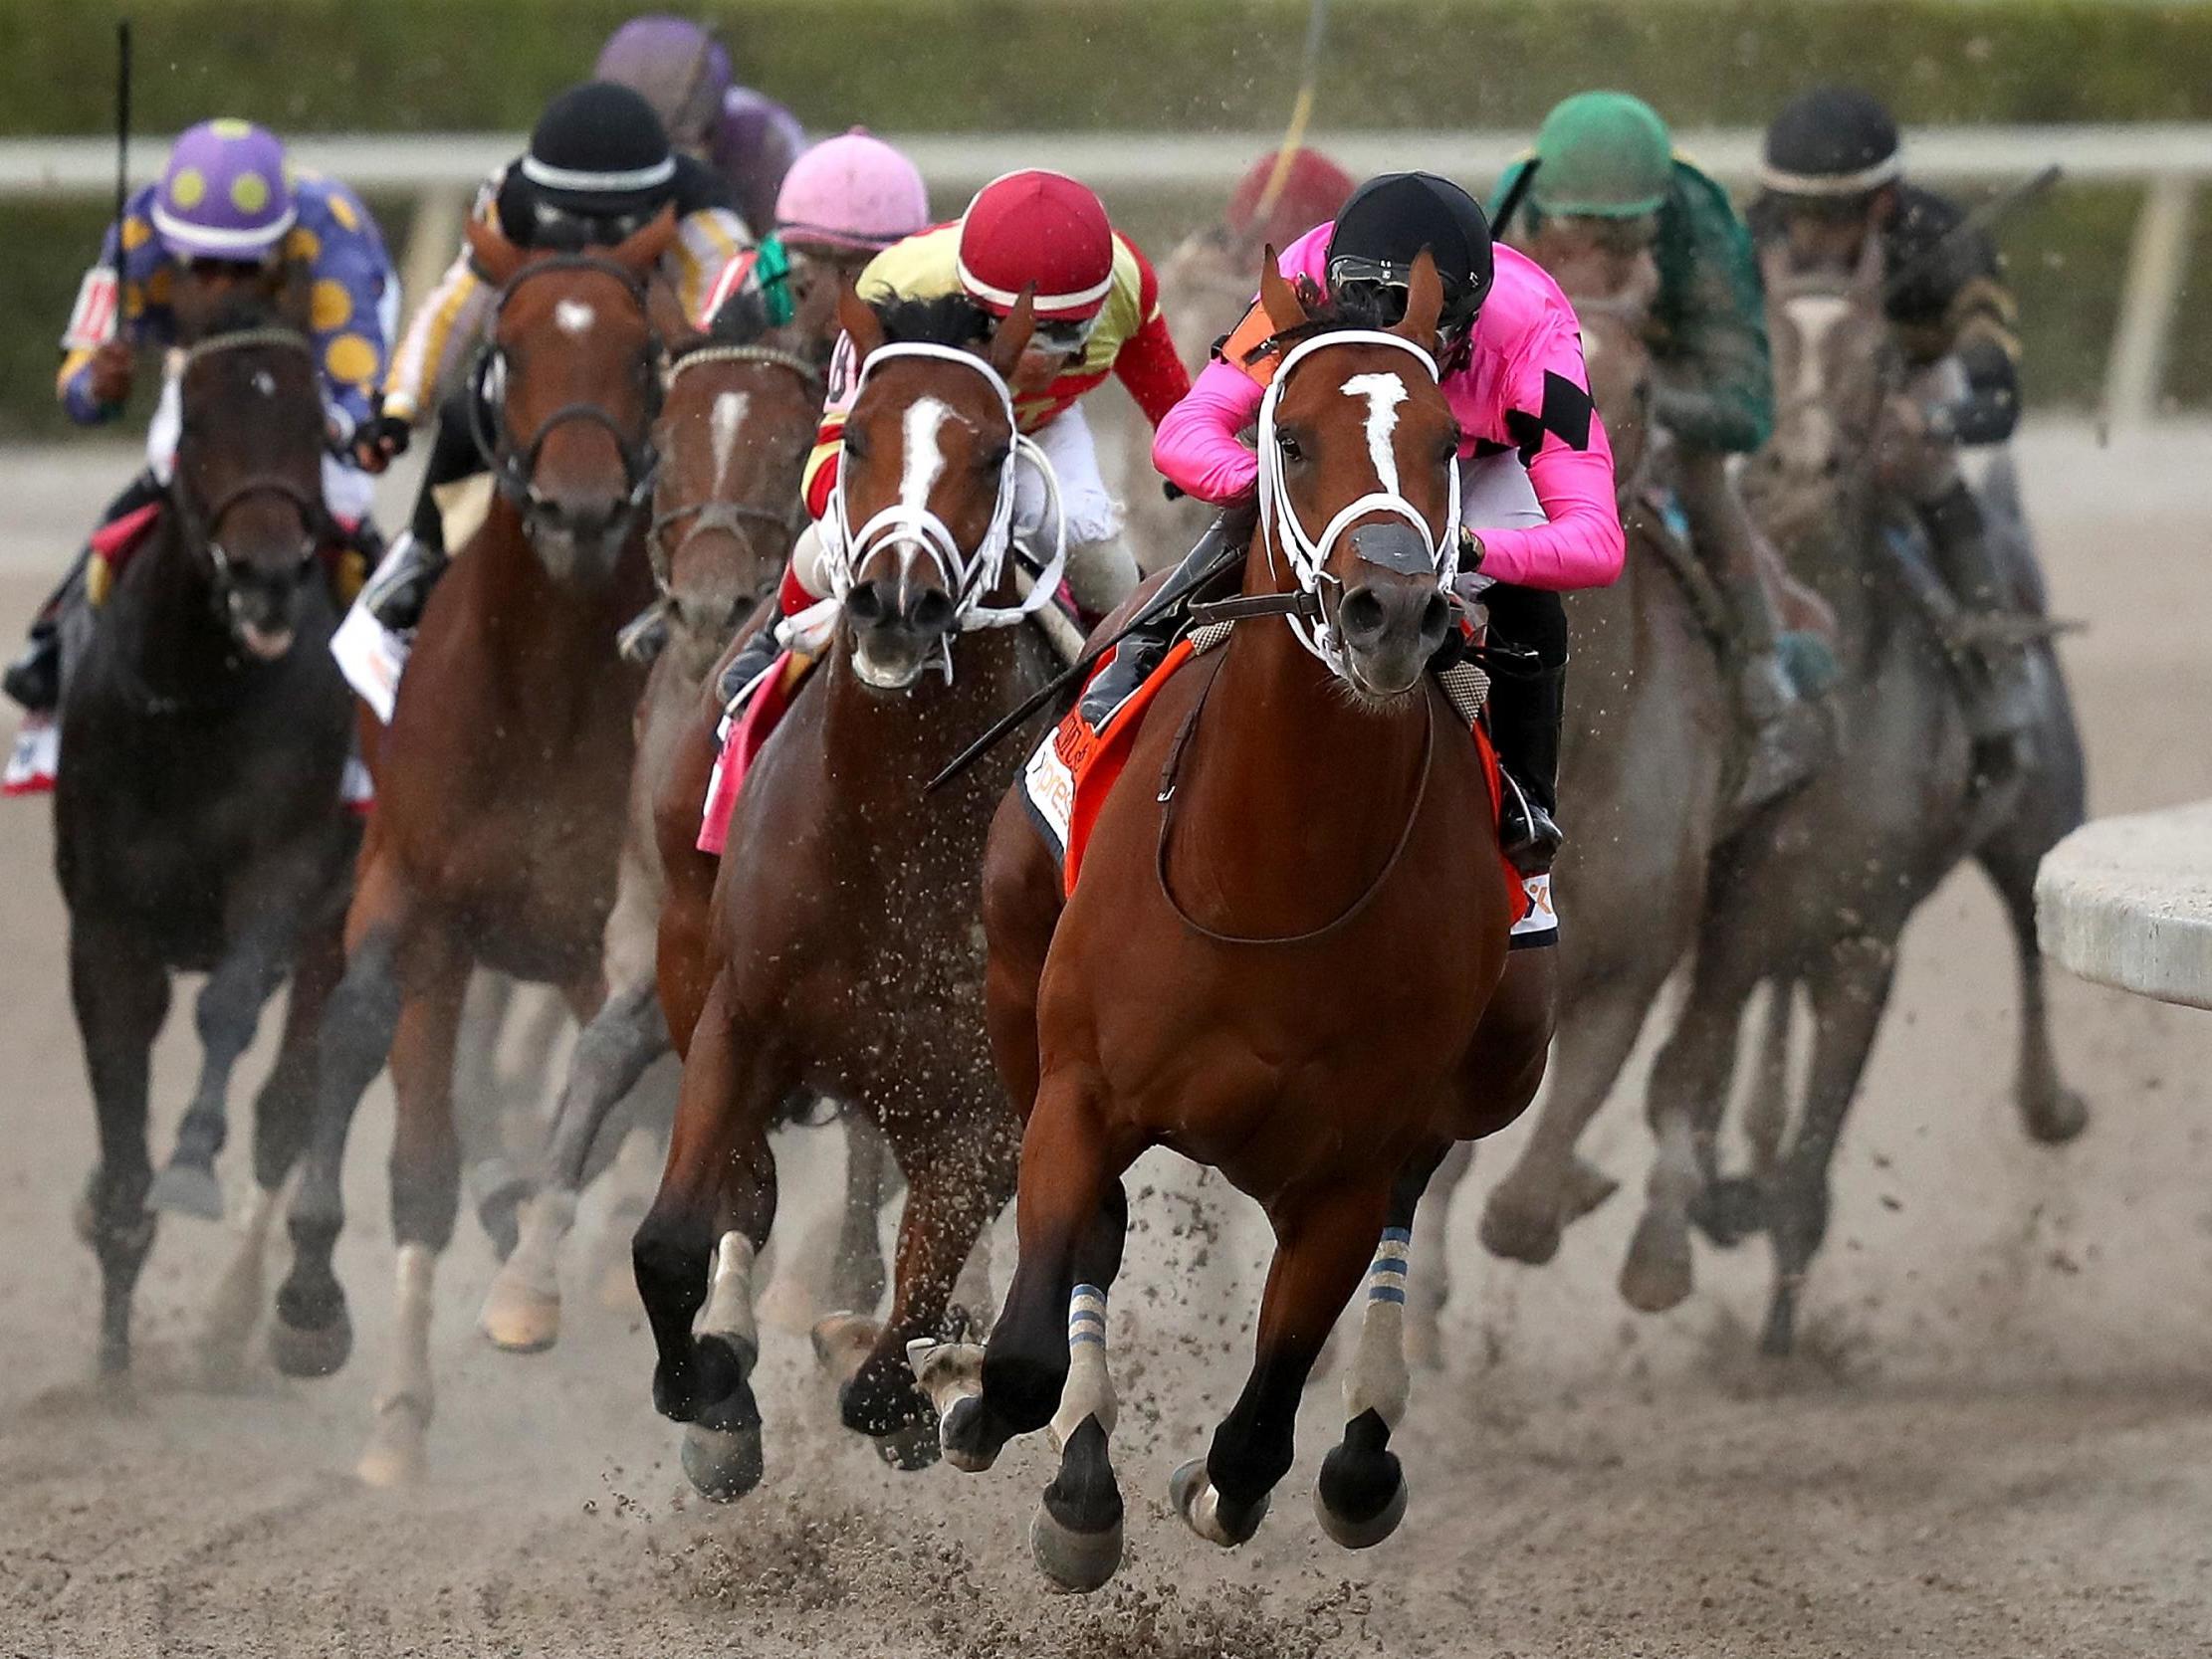 A horse race in 2019 at Gulfstream Park, Florida, where one of the racehorses that was killed ran its debut race earlier this year.